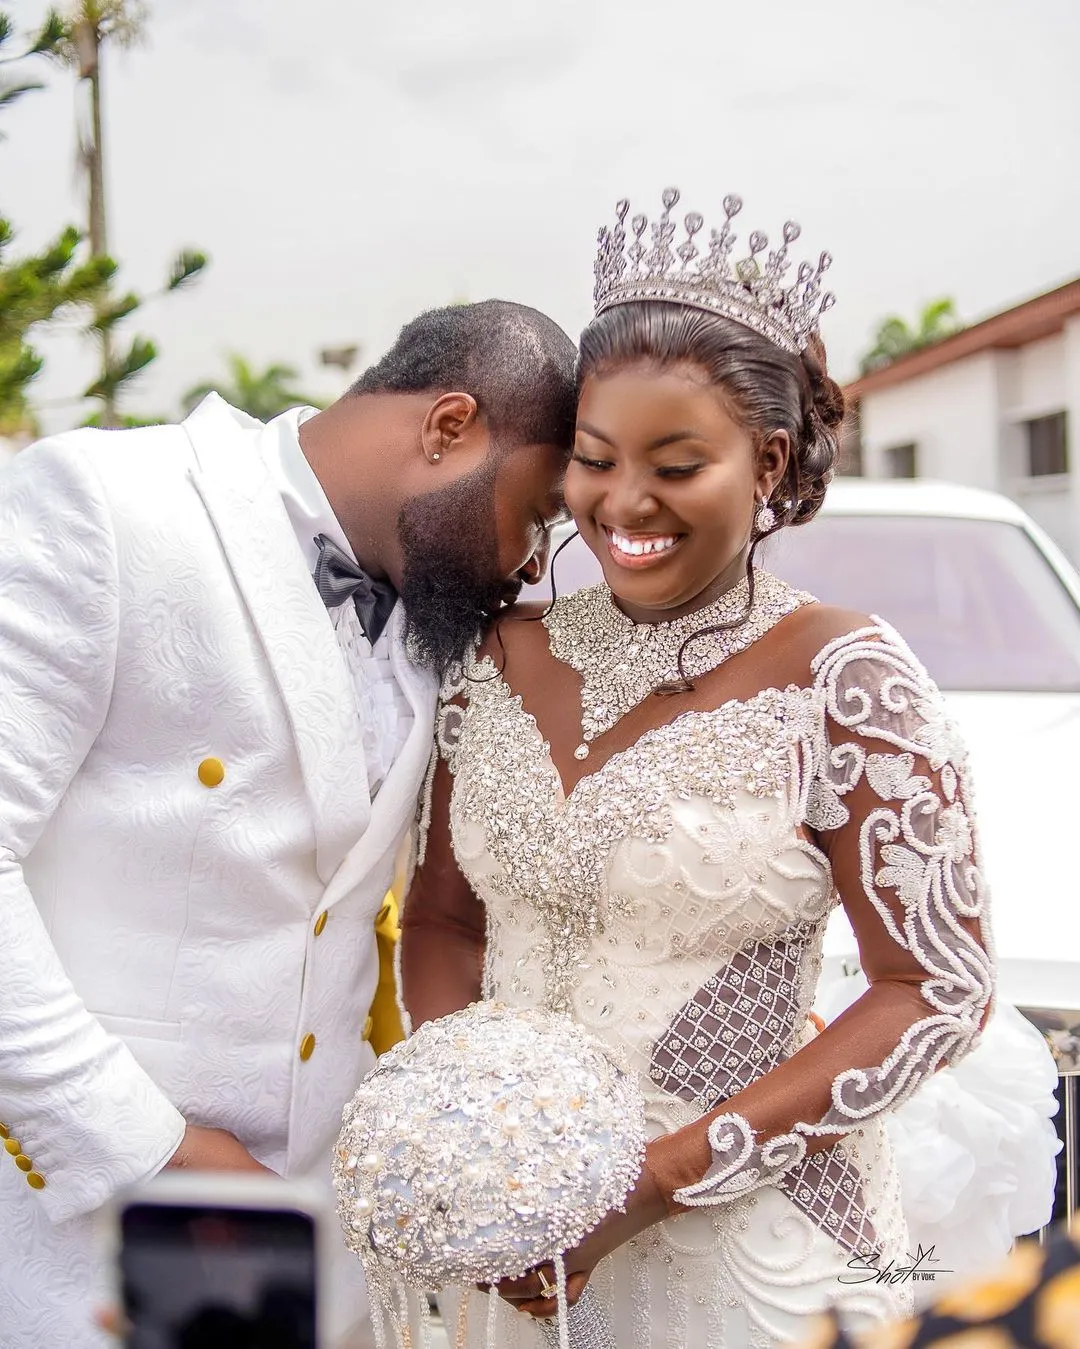 Harrysong and wife